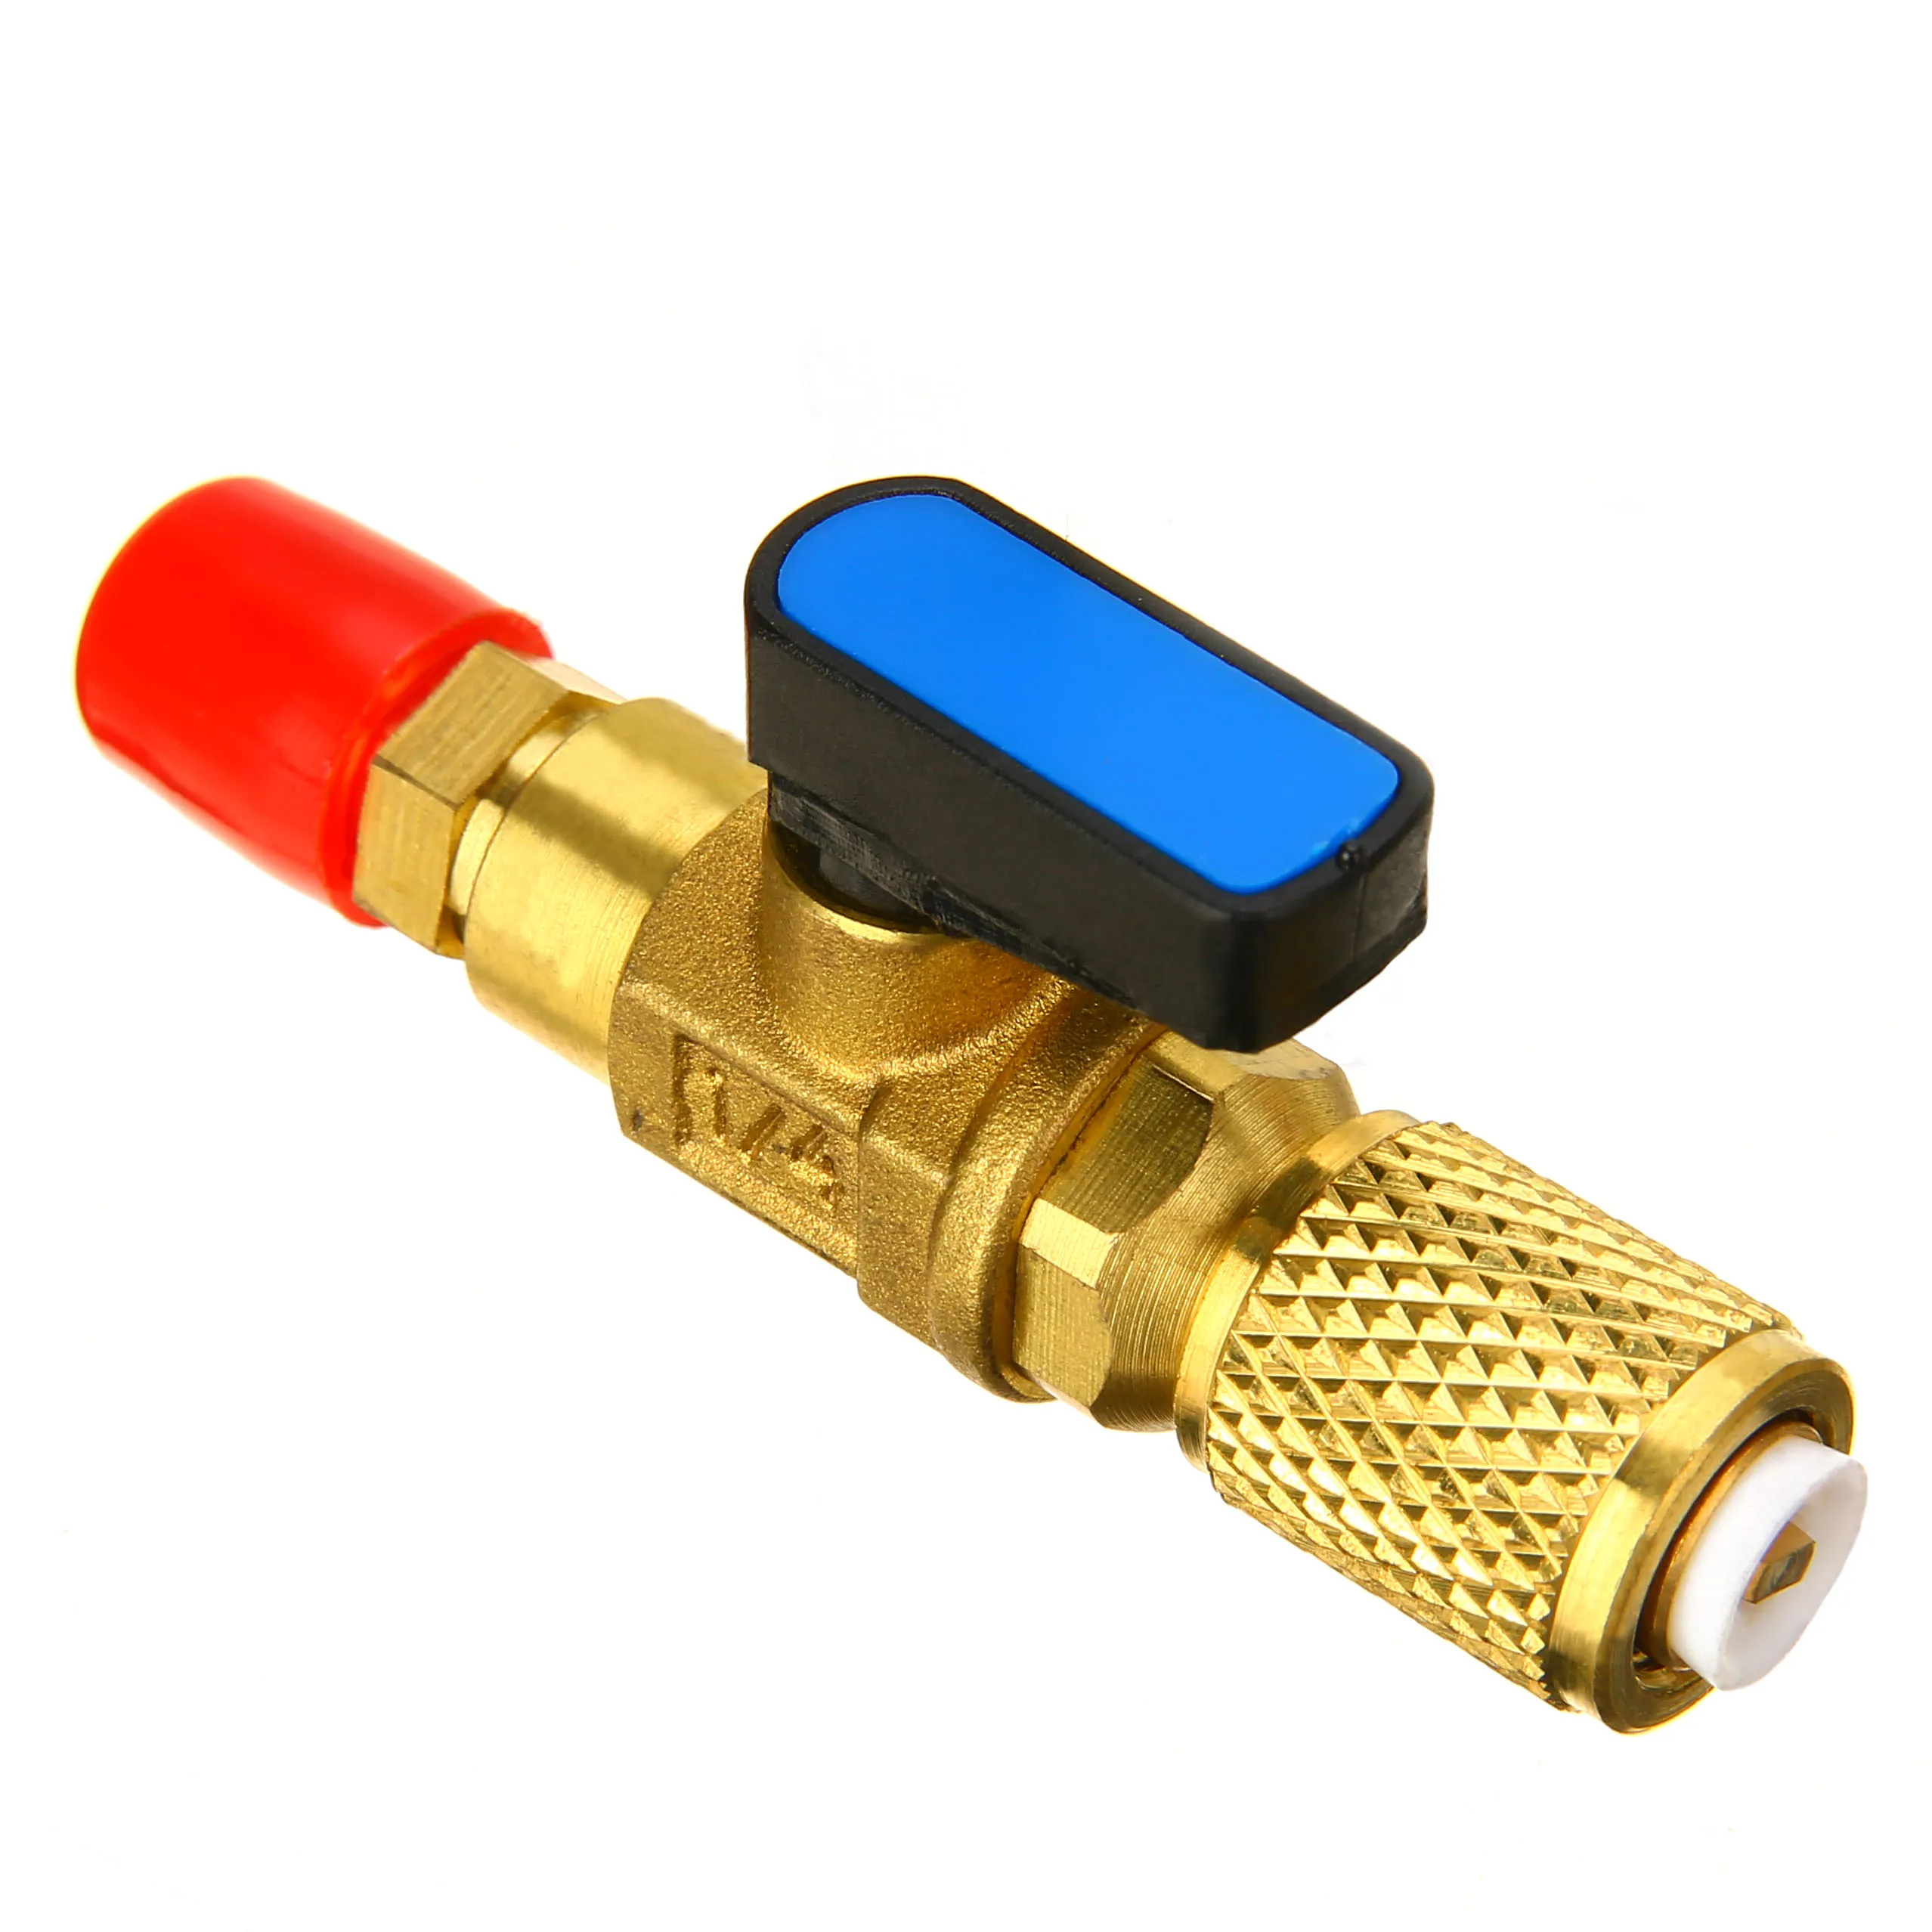 ApplianPar 1/4 Inch Male to 1/4 Inch Female Compact Ball Valve for Air Conditioning Refrigerant R410A R134A R12 R22 R502 AC HVAC Charging Hoses Shut Off Ball Valve Fittings 45 Degrees Angle 